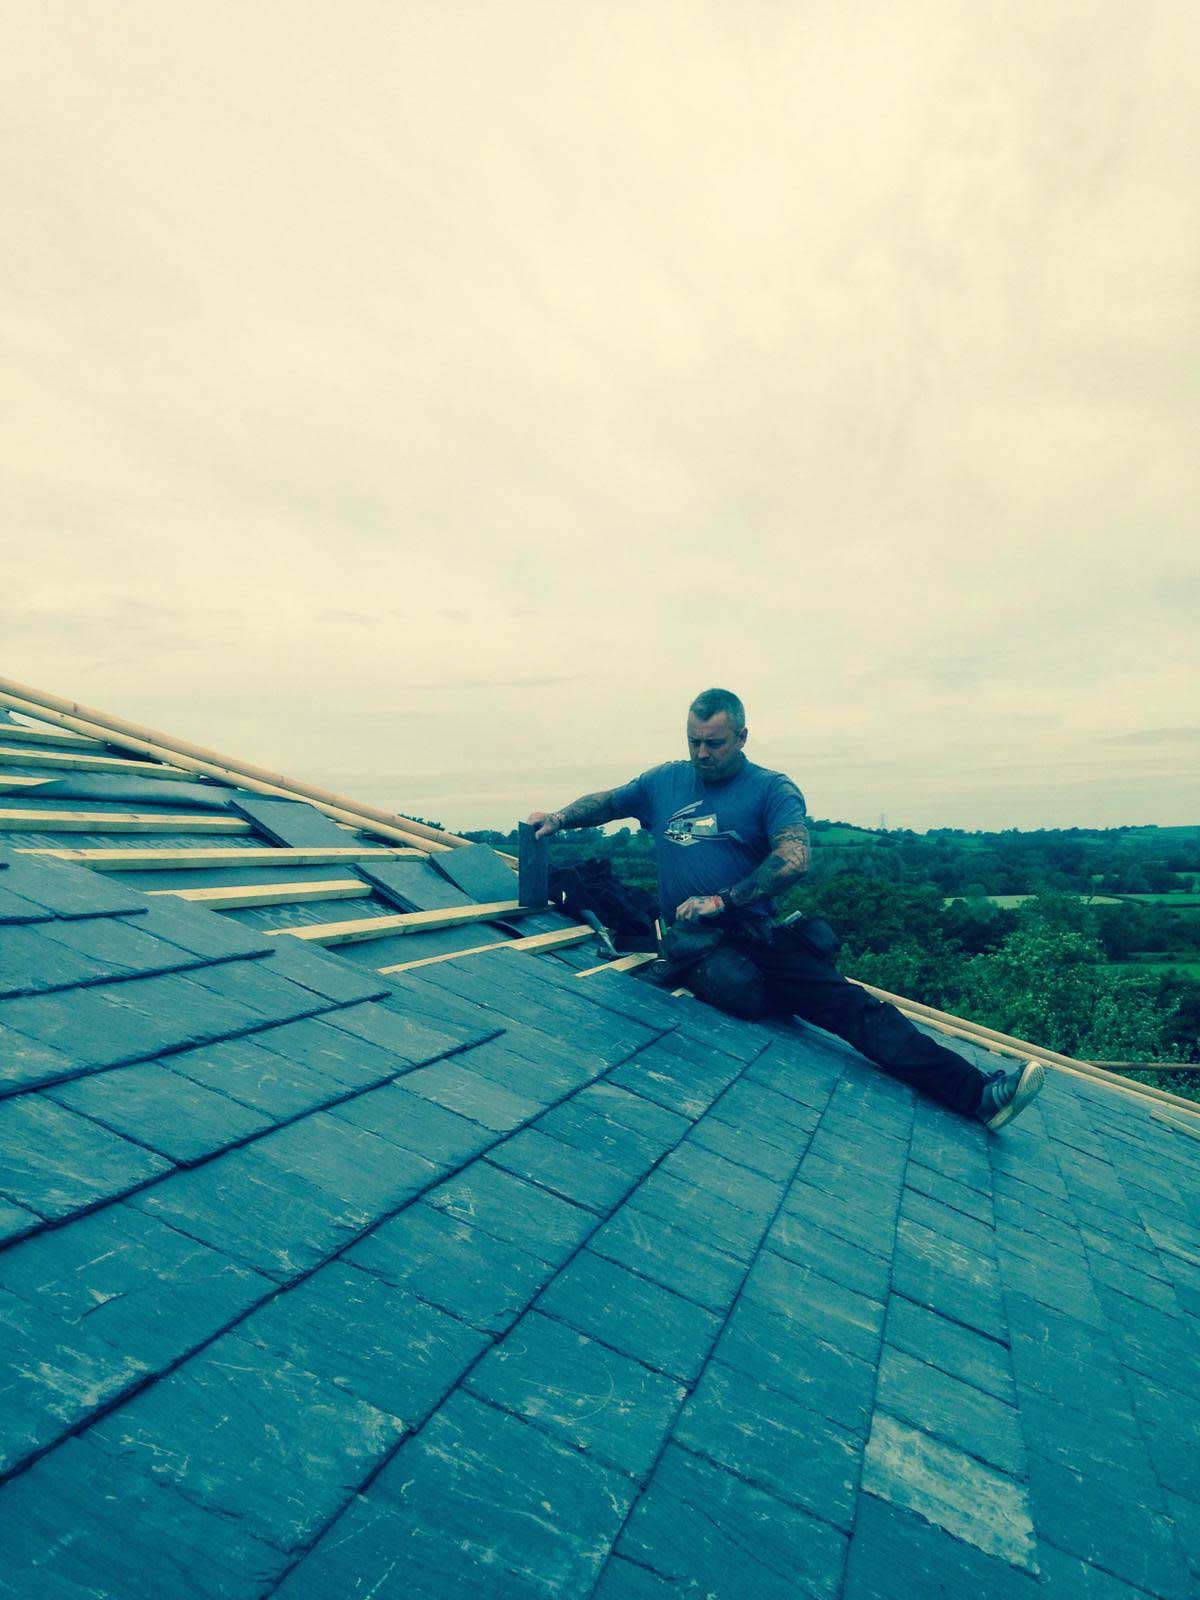 Man working on a roof repair.